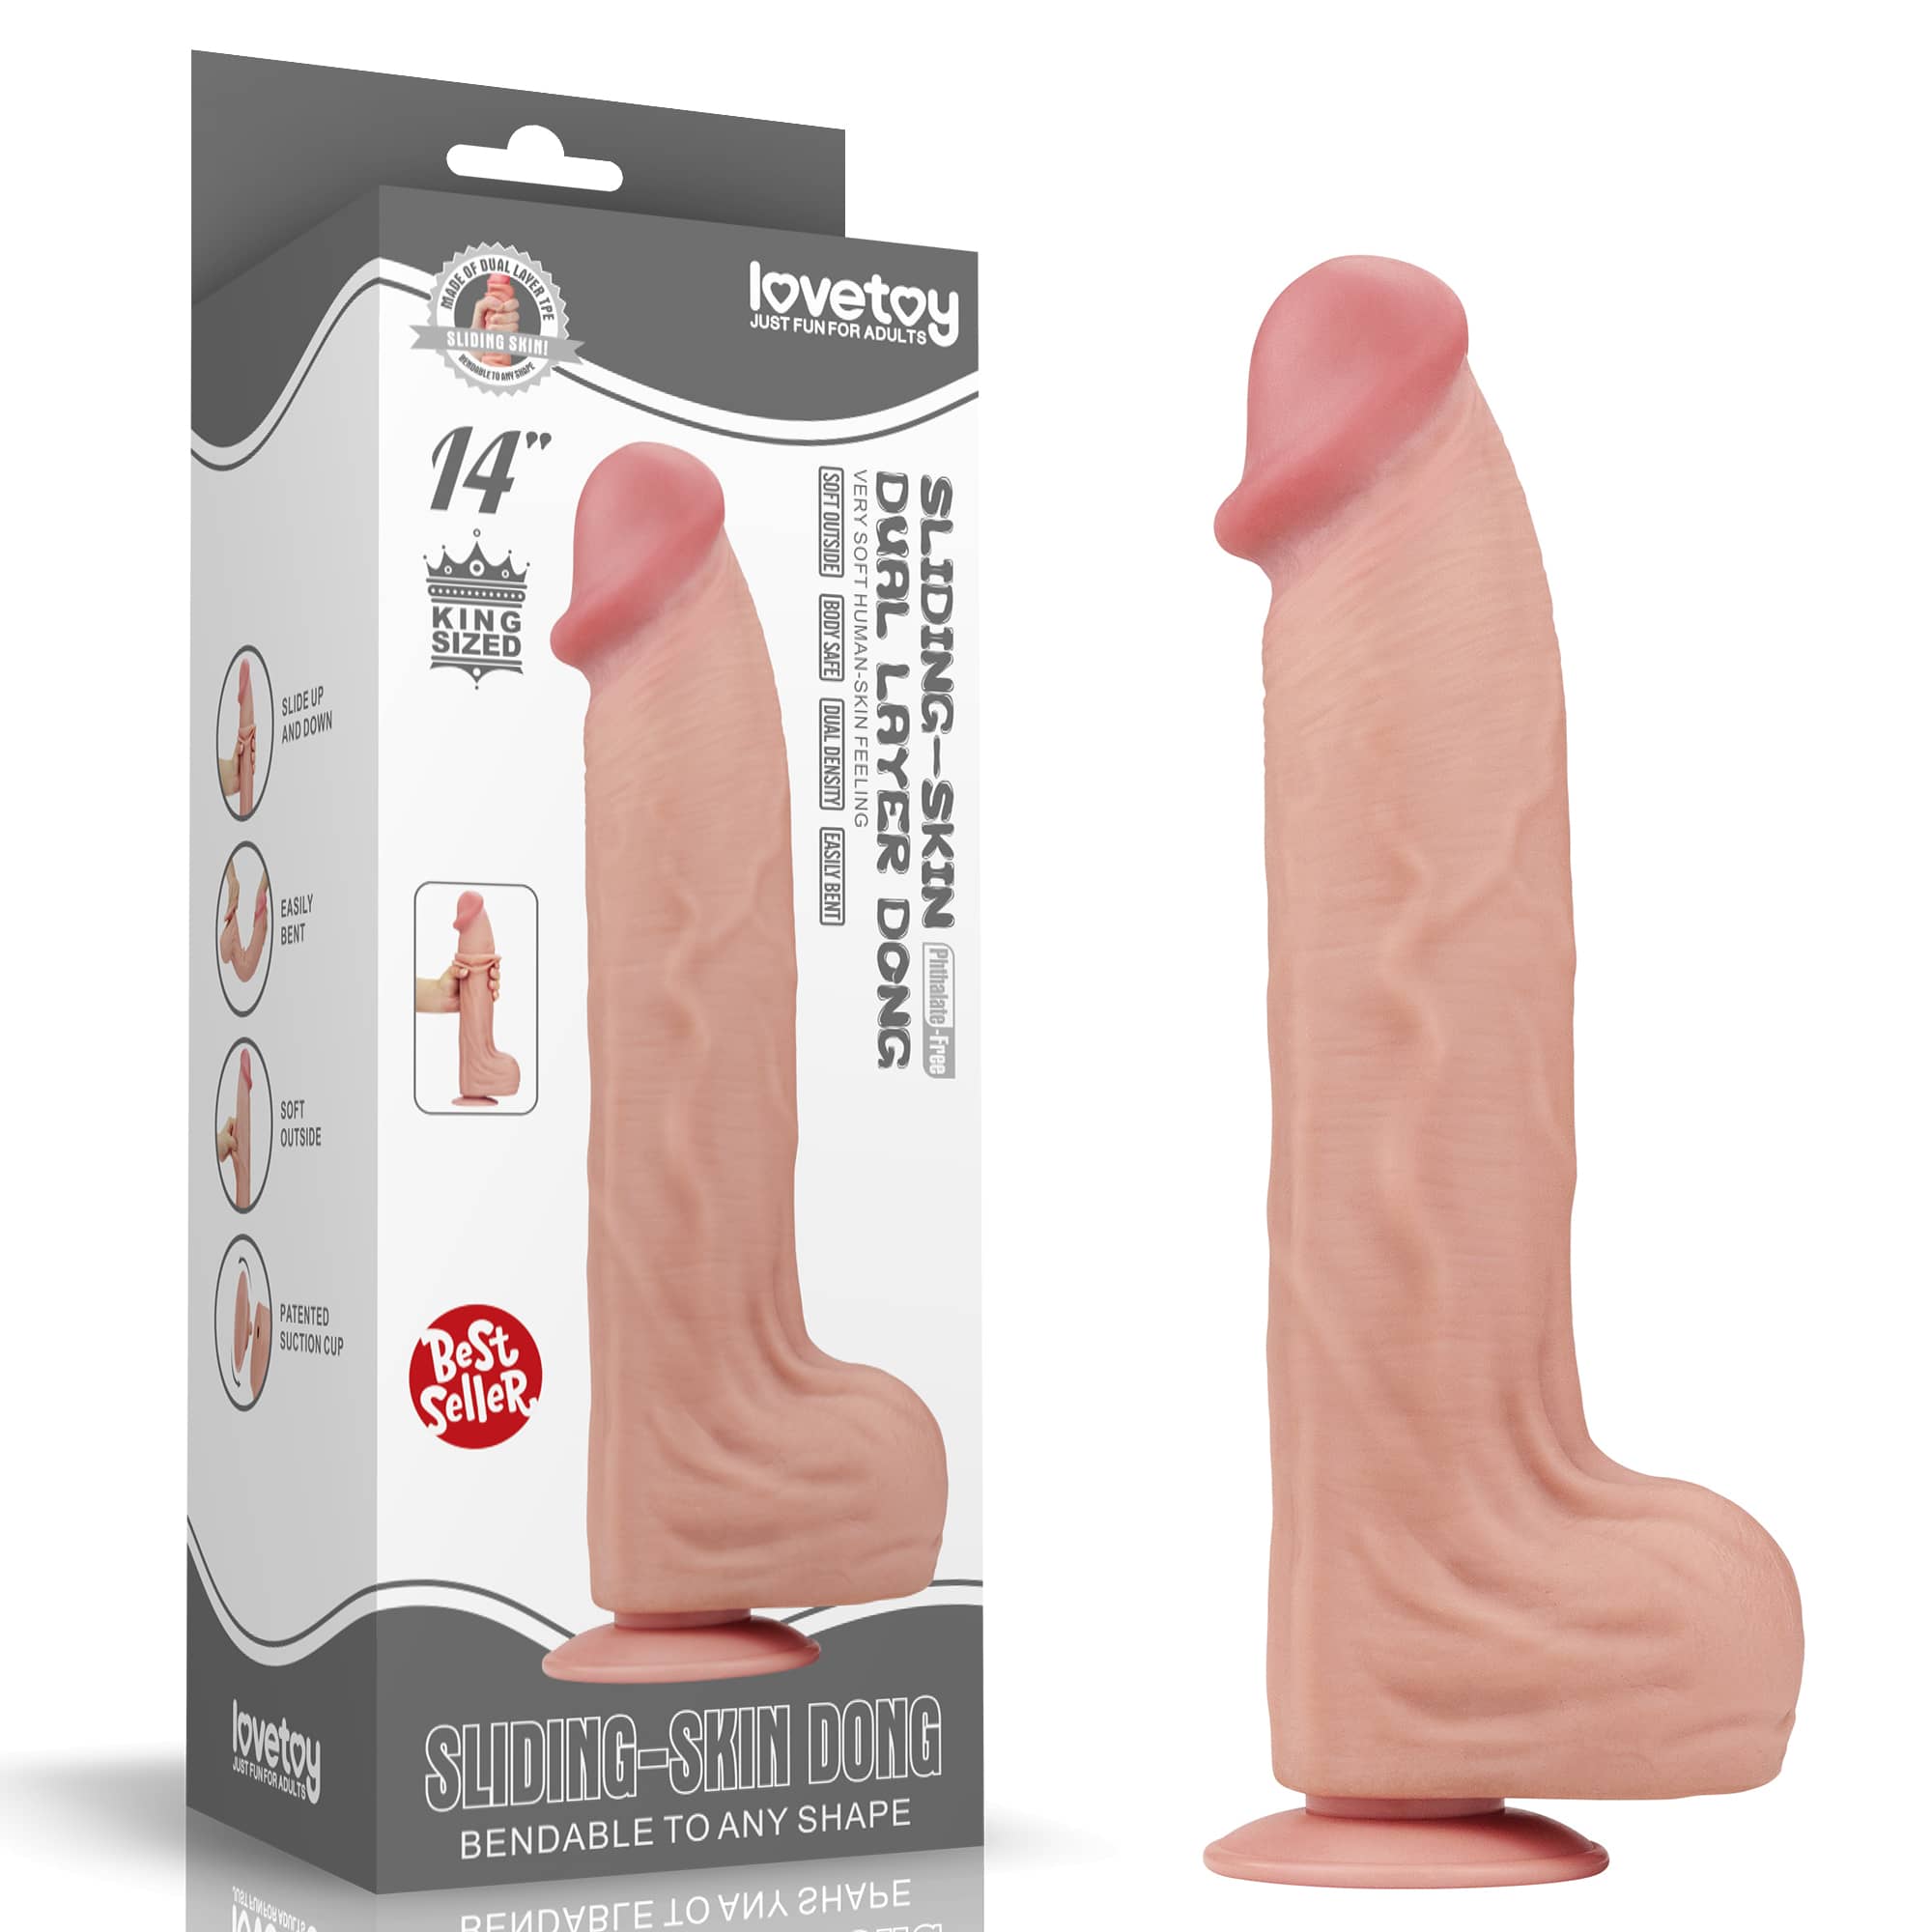 The packaging of the 14 inches king sized sliding skin dildo